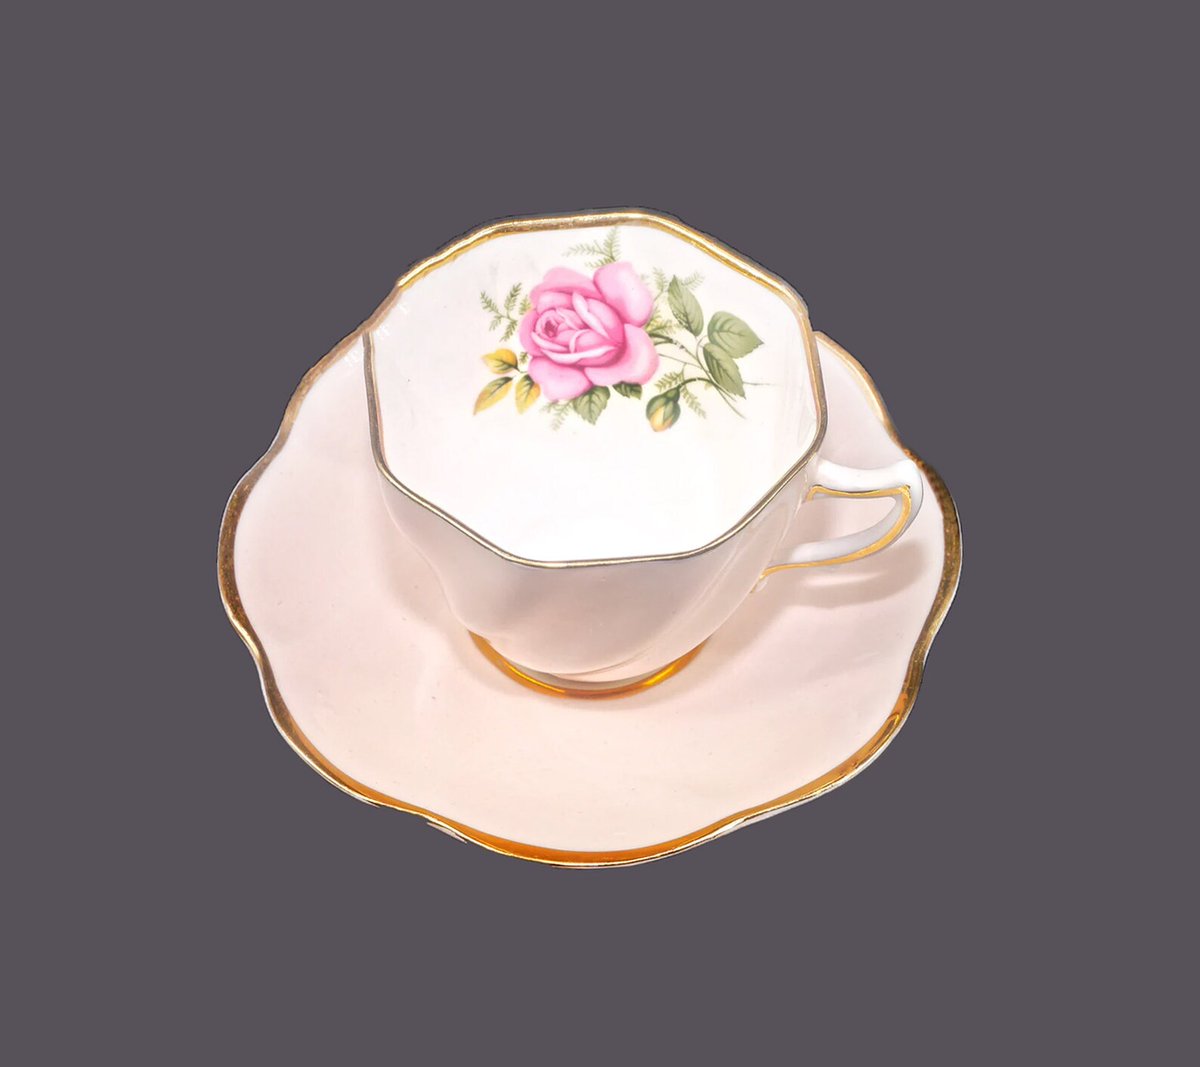 Clare Bone China 340 hand-decorated cup and saucer set. Soft pink, roses. made in England. etsy.me/3QySZpR via @Etsy #BuyfromGroovy #antiqueshop #tabledecor #tableware #teatime #teaparty #ClareBoneChina #pinkteaset #giftformom #MothersDay #EtsySellers